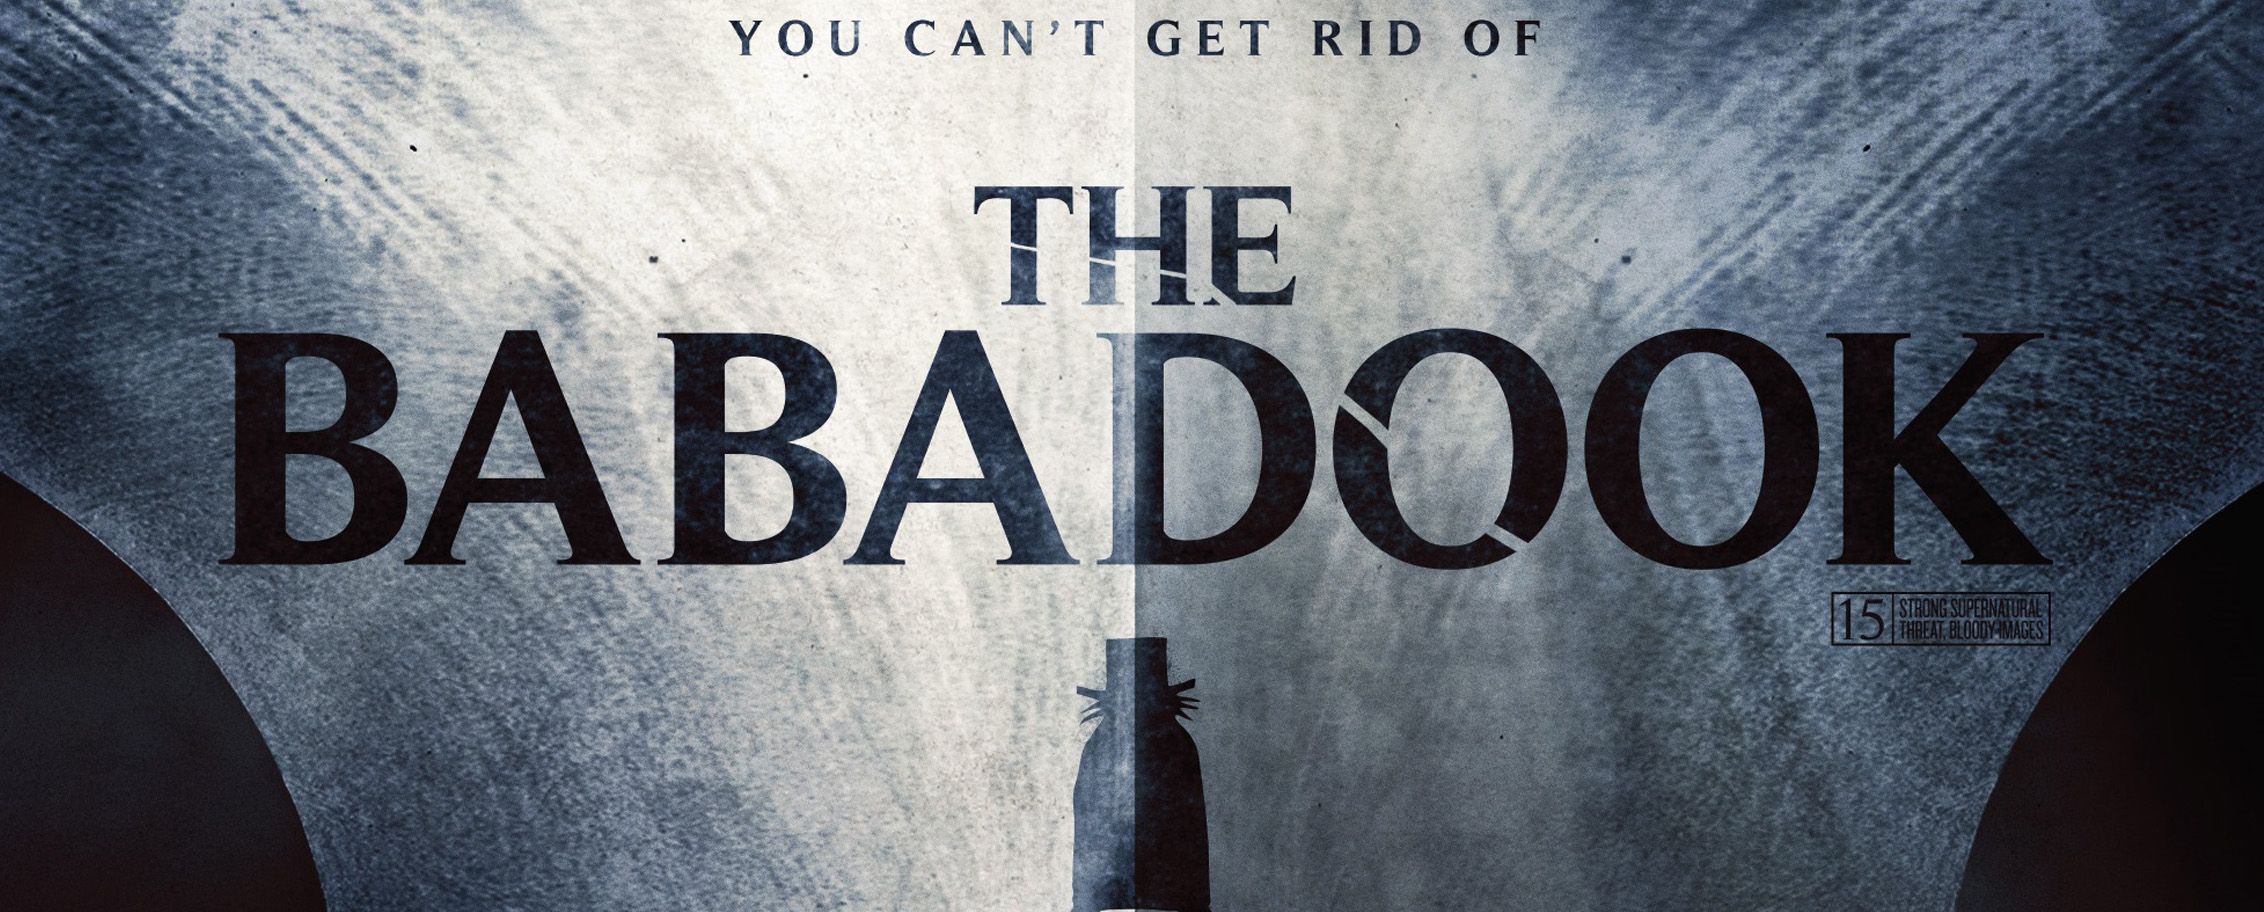 The Babadook banner